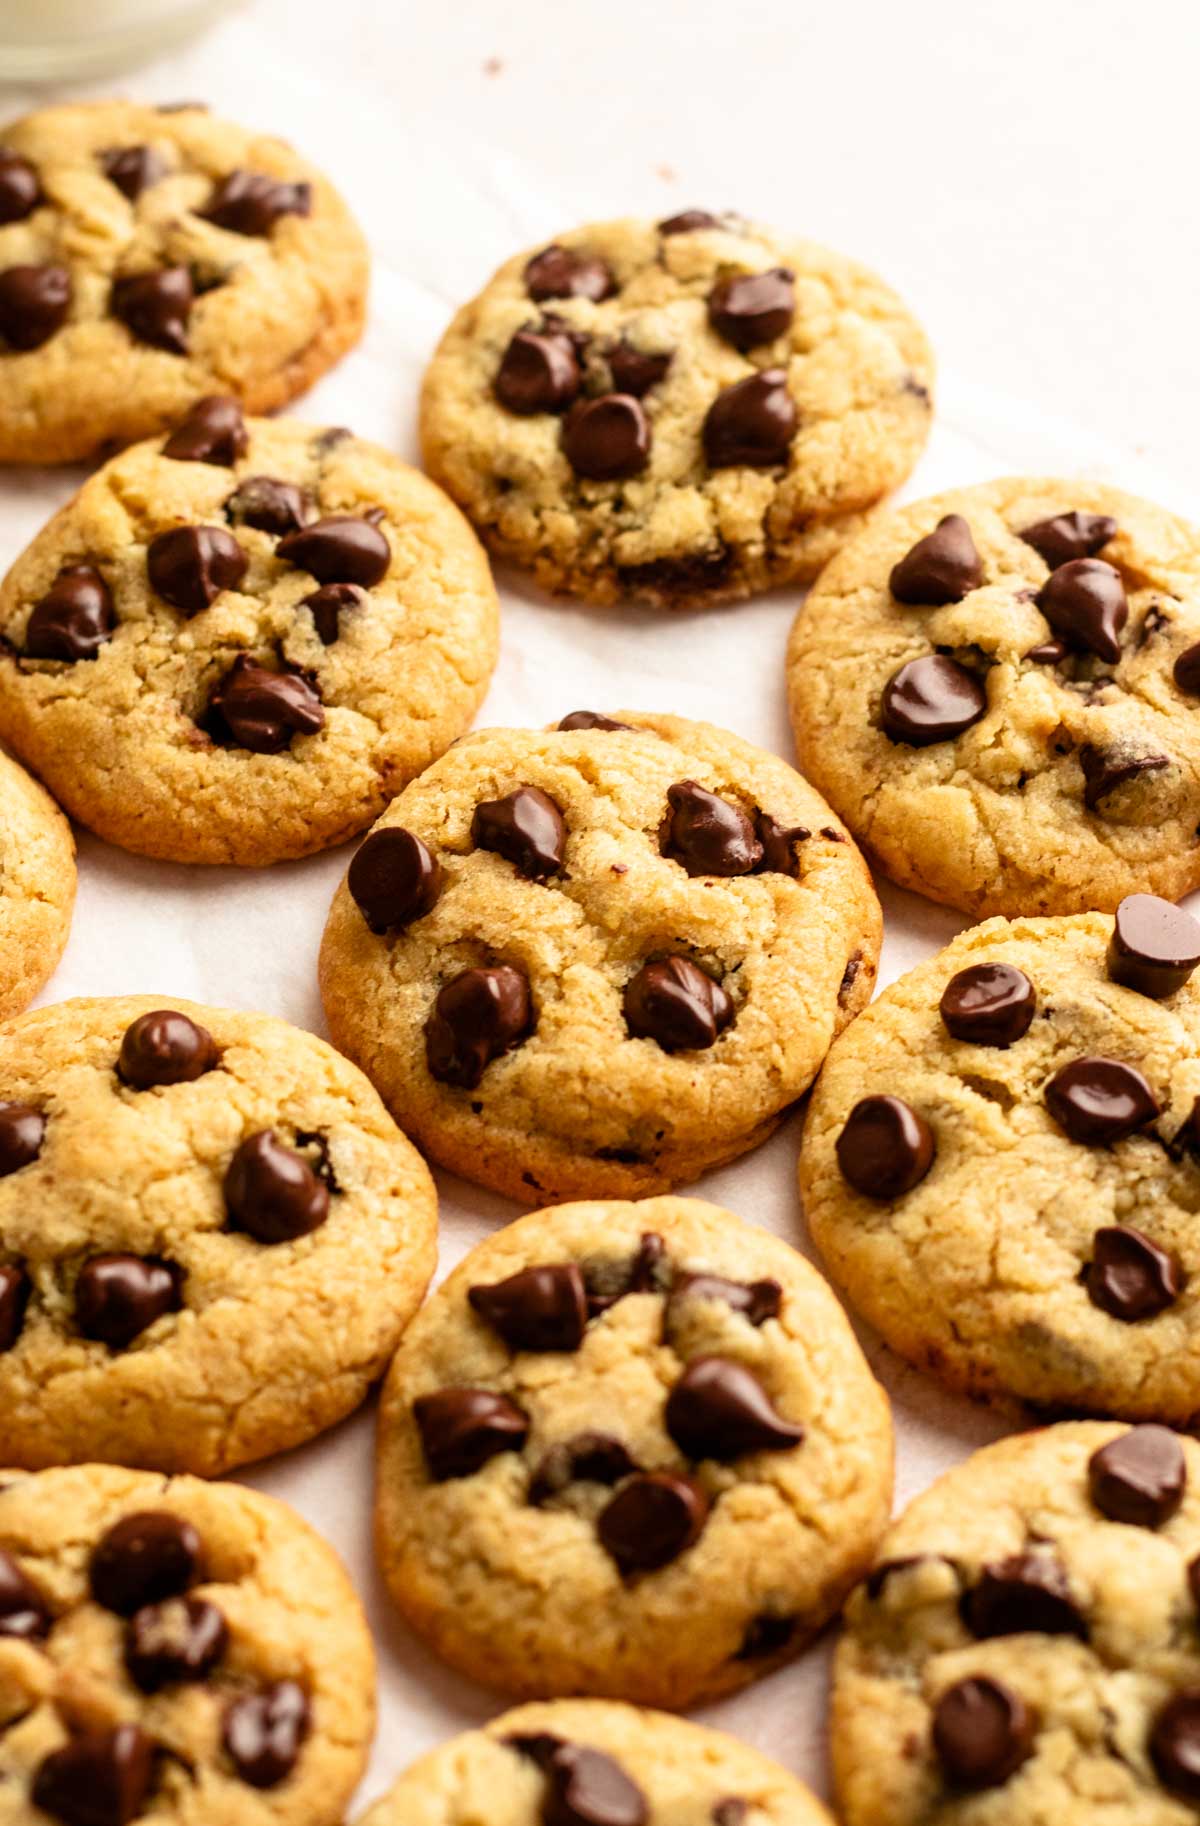 Mini chocolate chip cookies on a parchment paper.